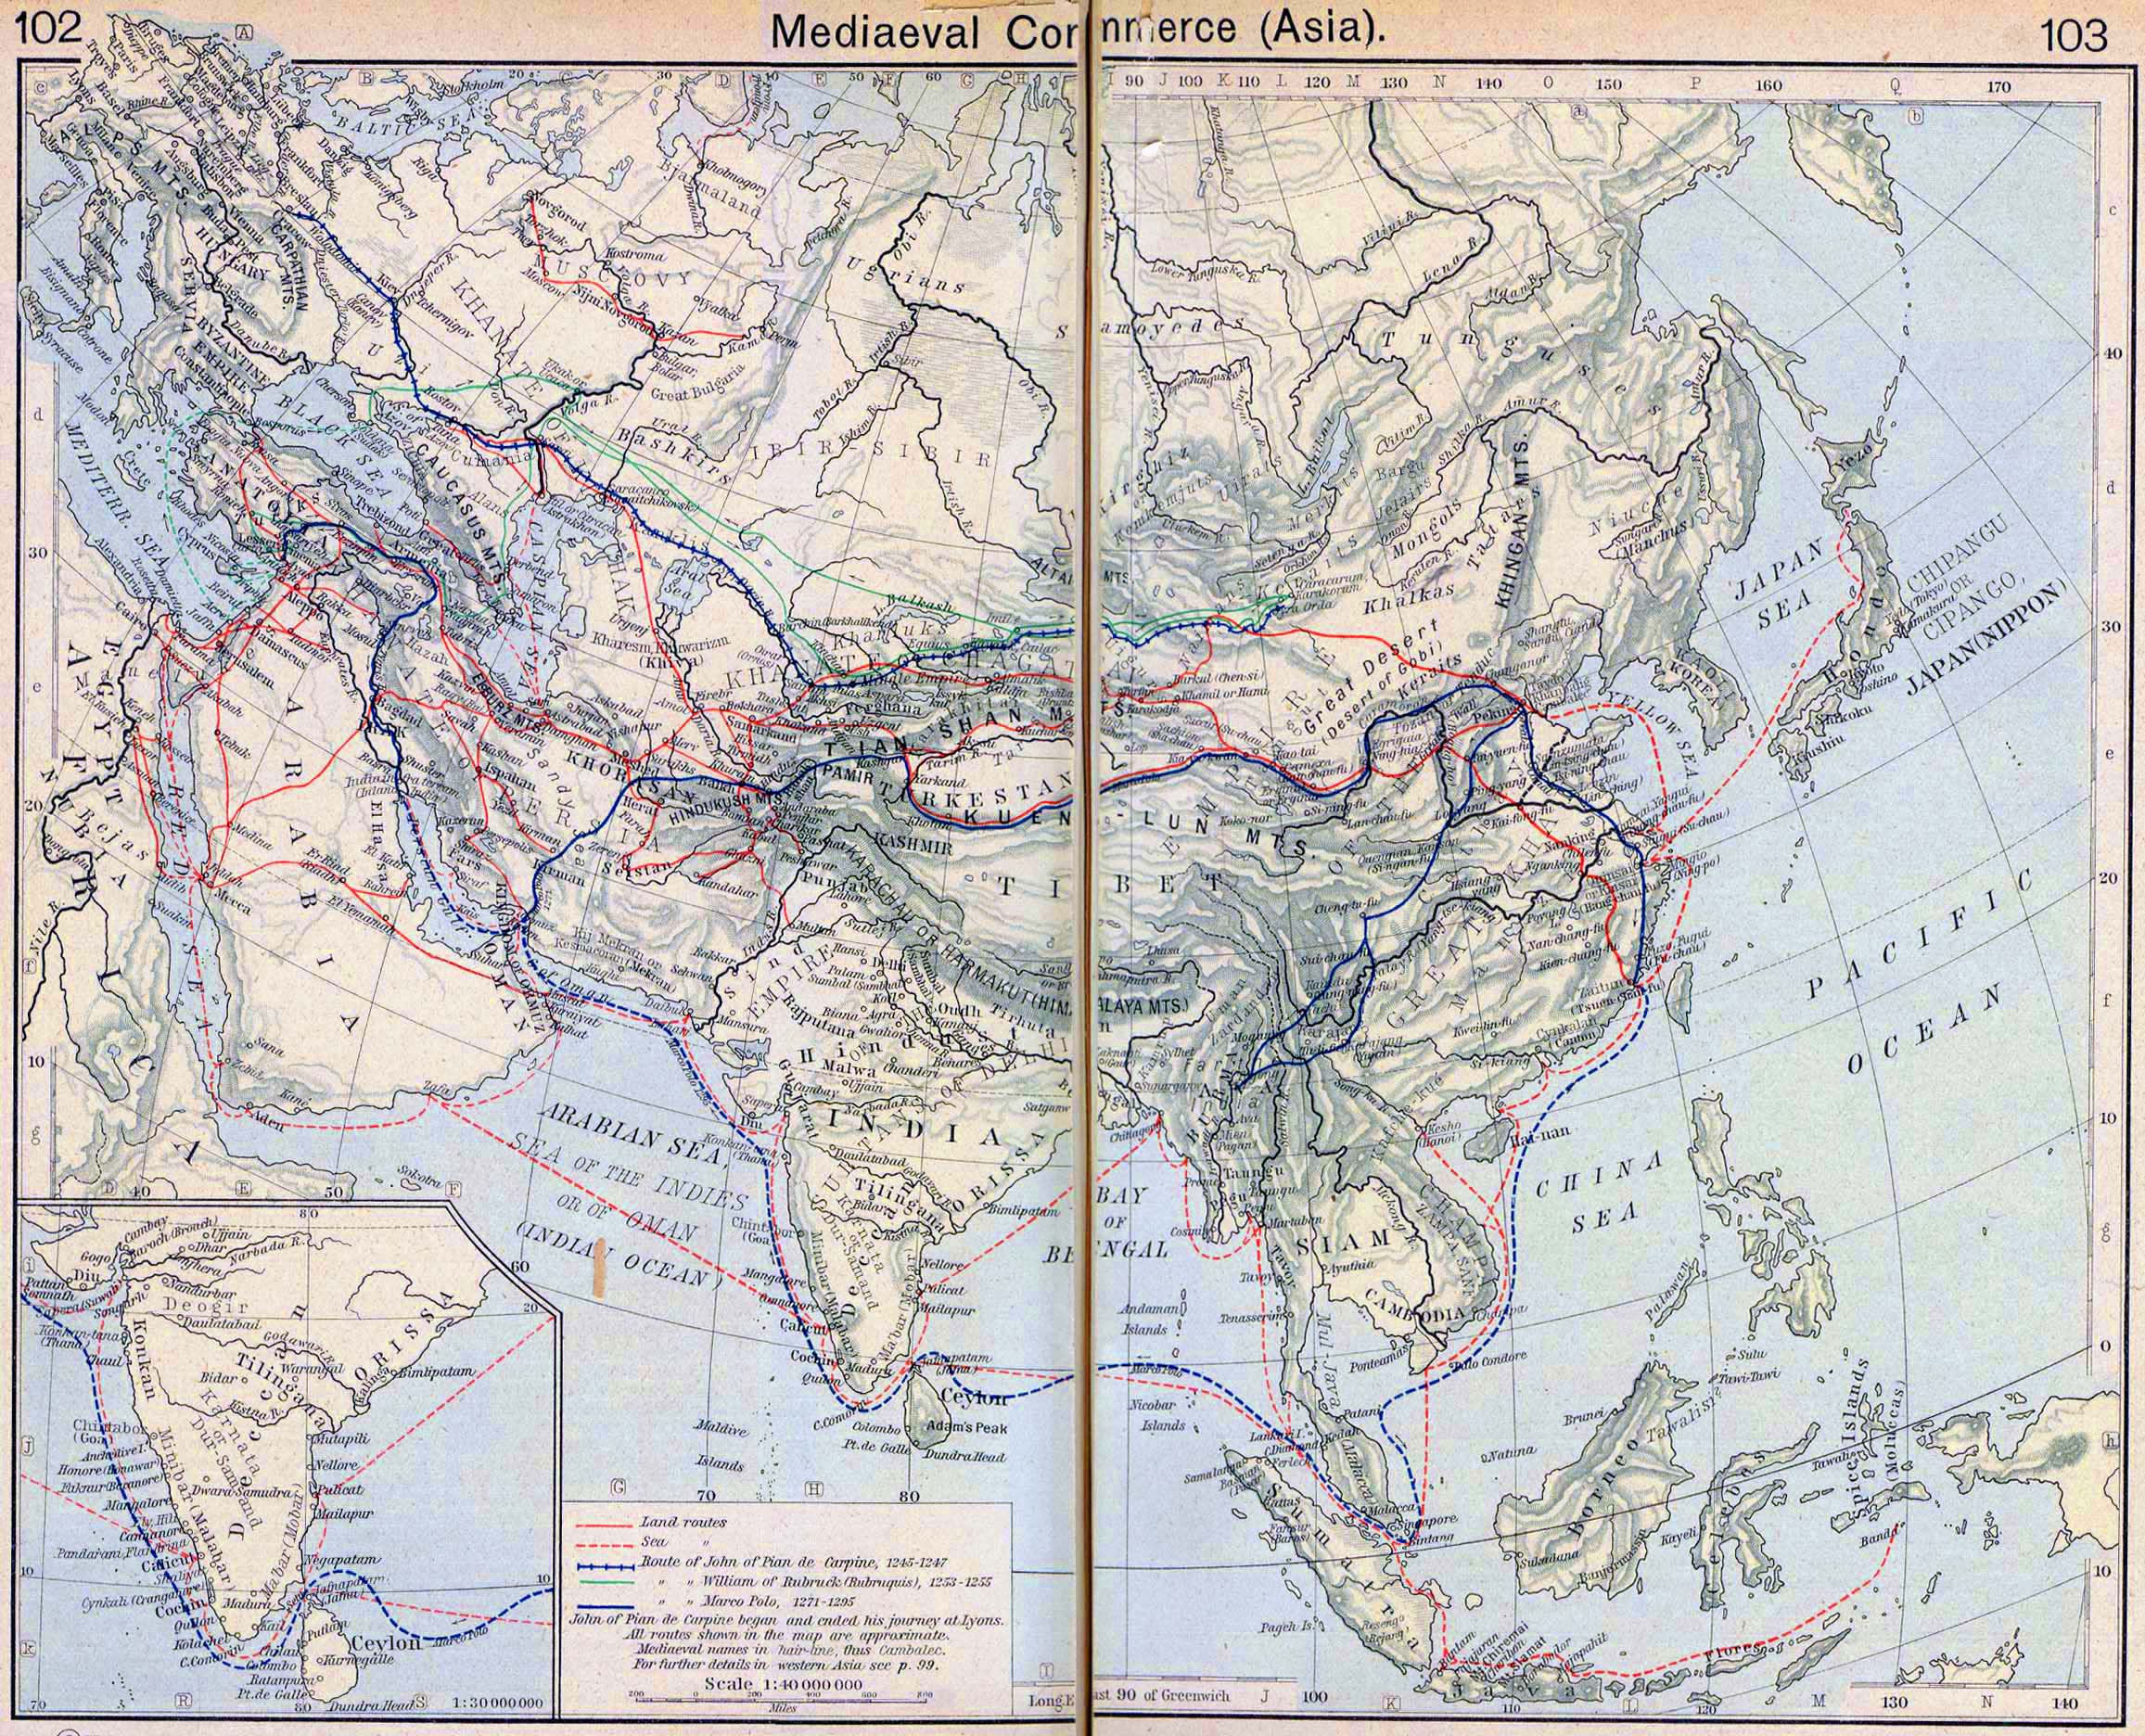 Map of Asia 13th century, travel routes